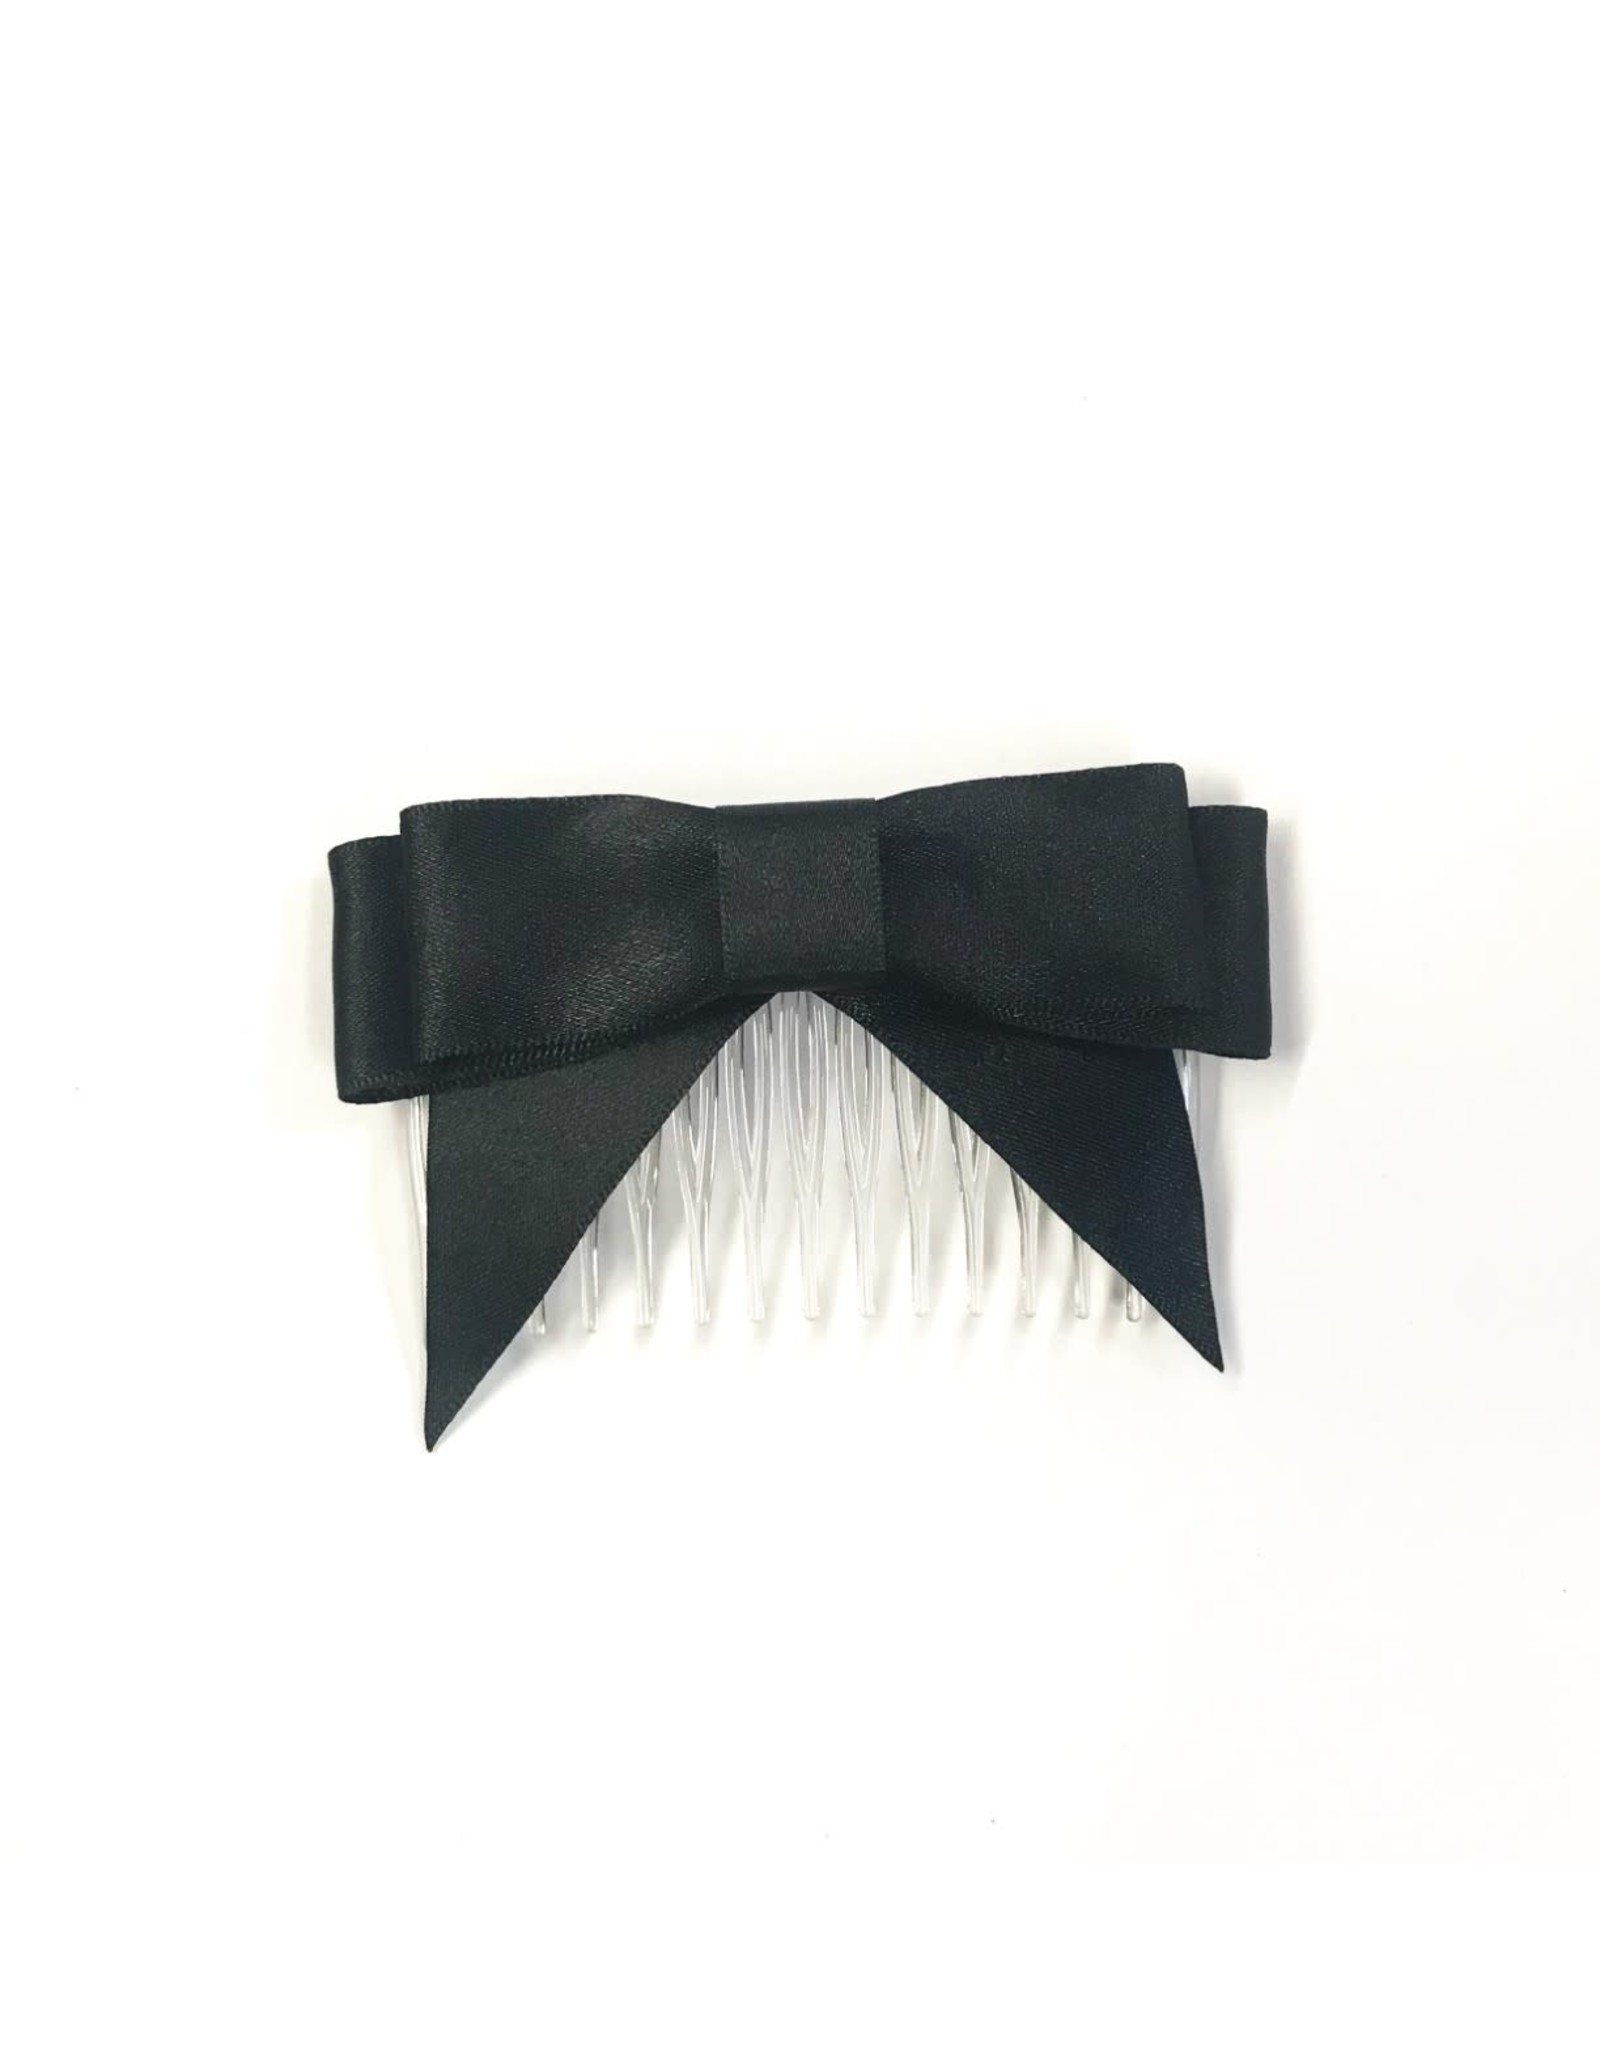 Mimy Design Satin Hair Bow with Comb